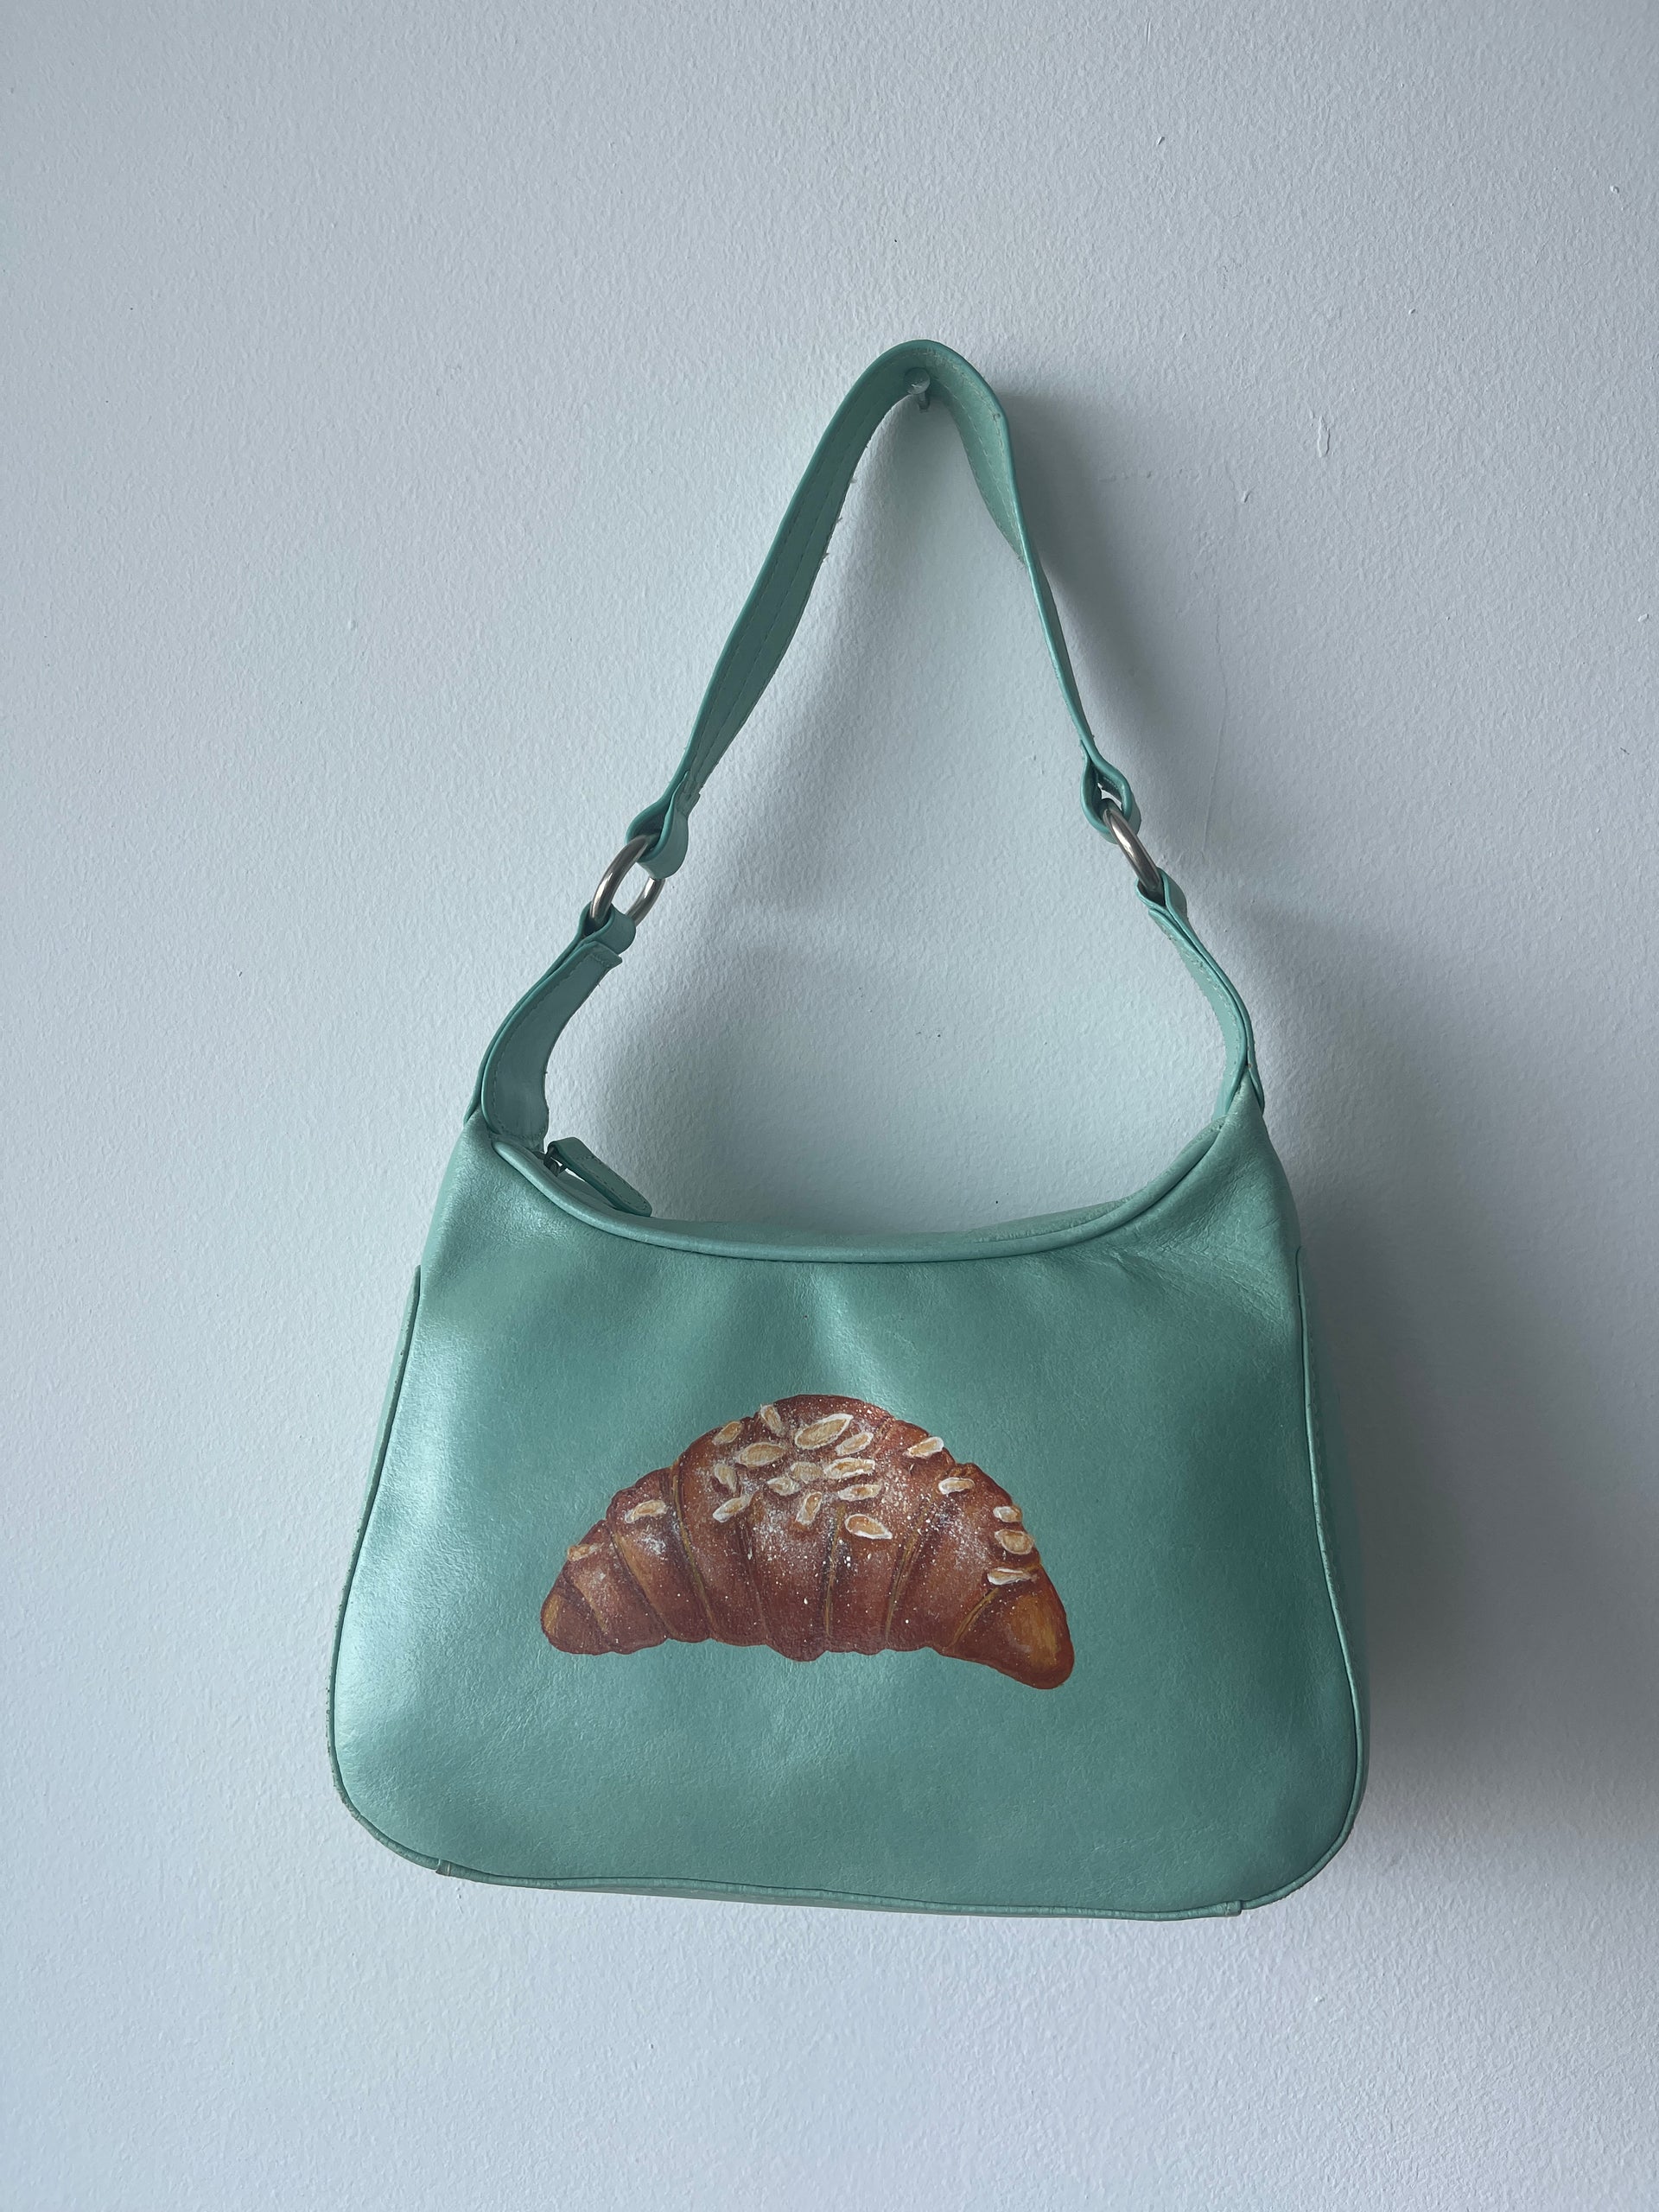 Hand-painted Almond Croissant Bag